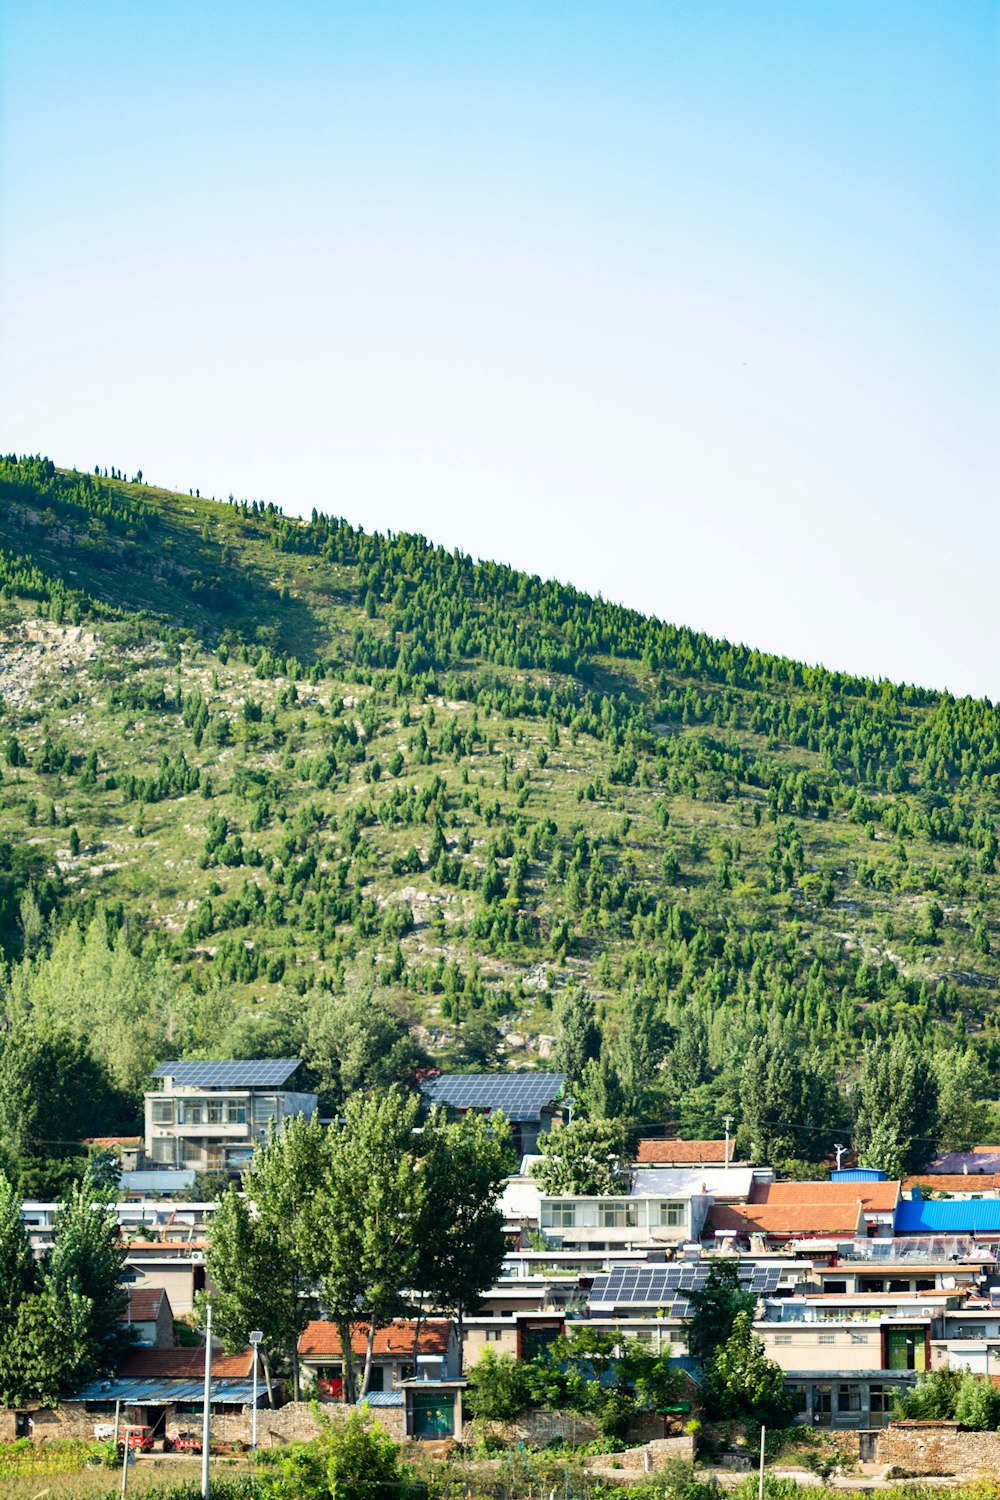 a hillside with houses in the foreground and trees in the background